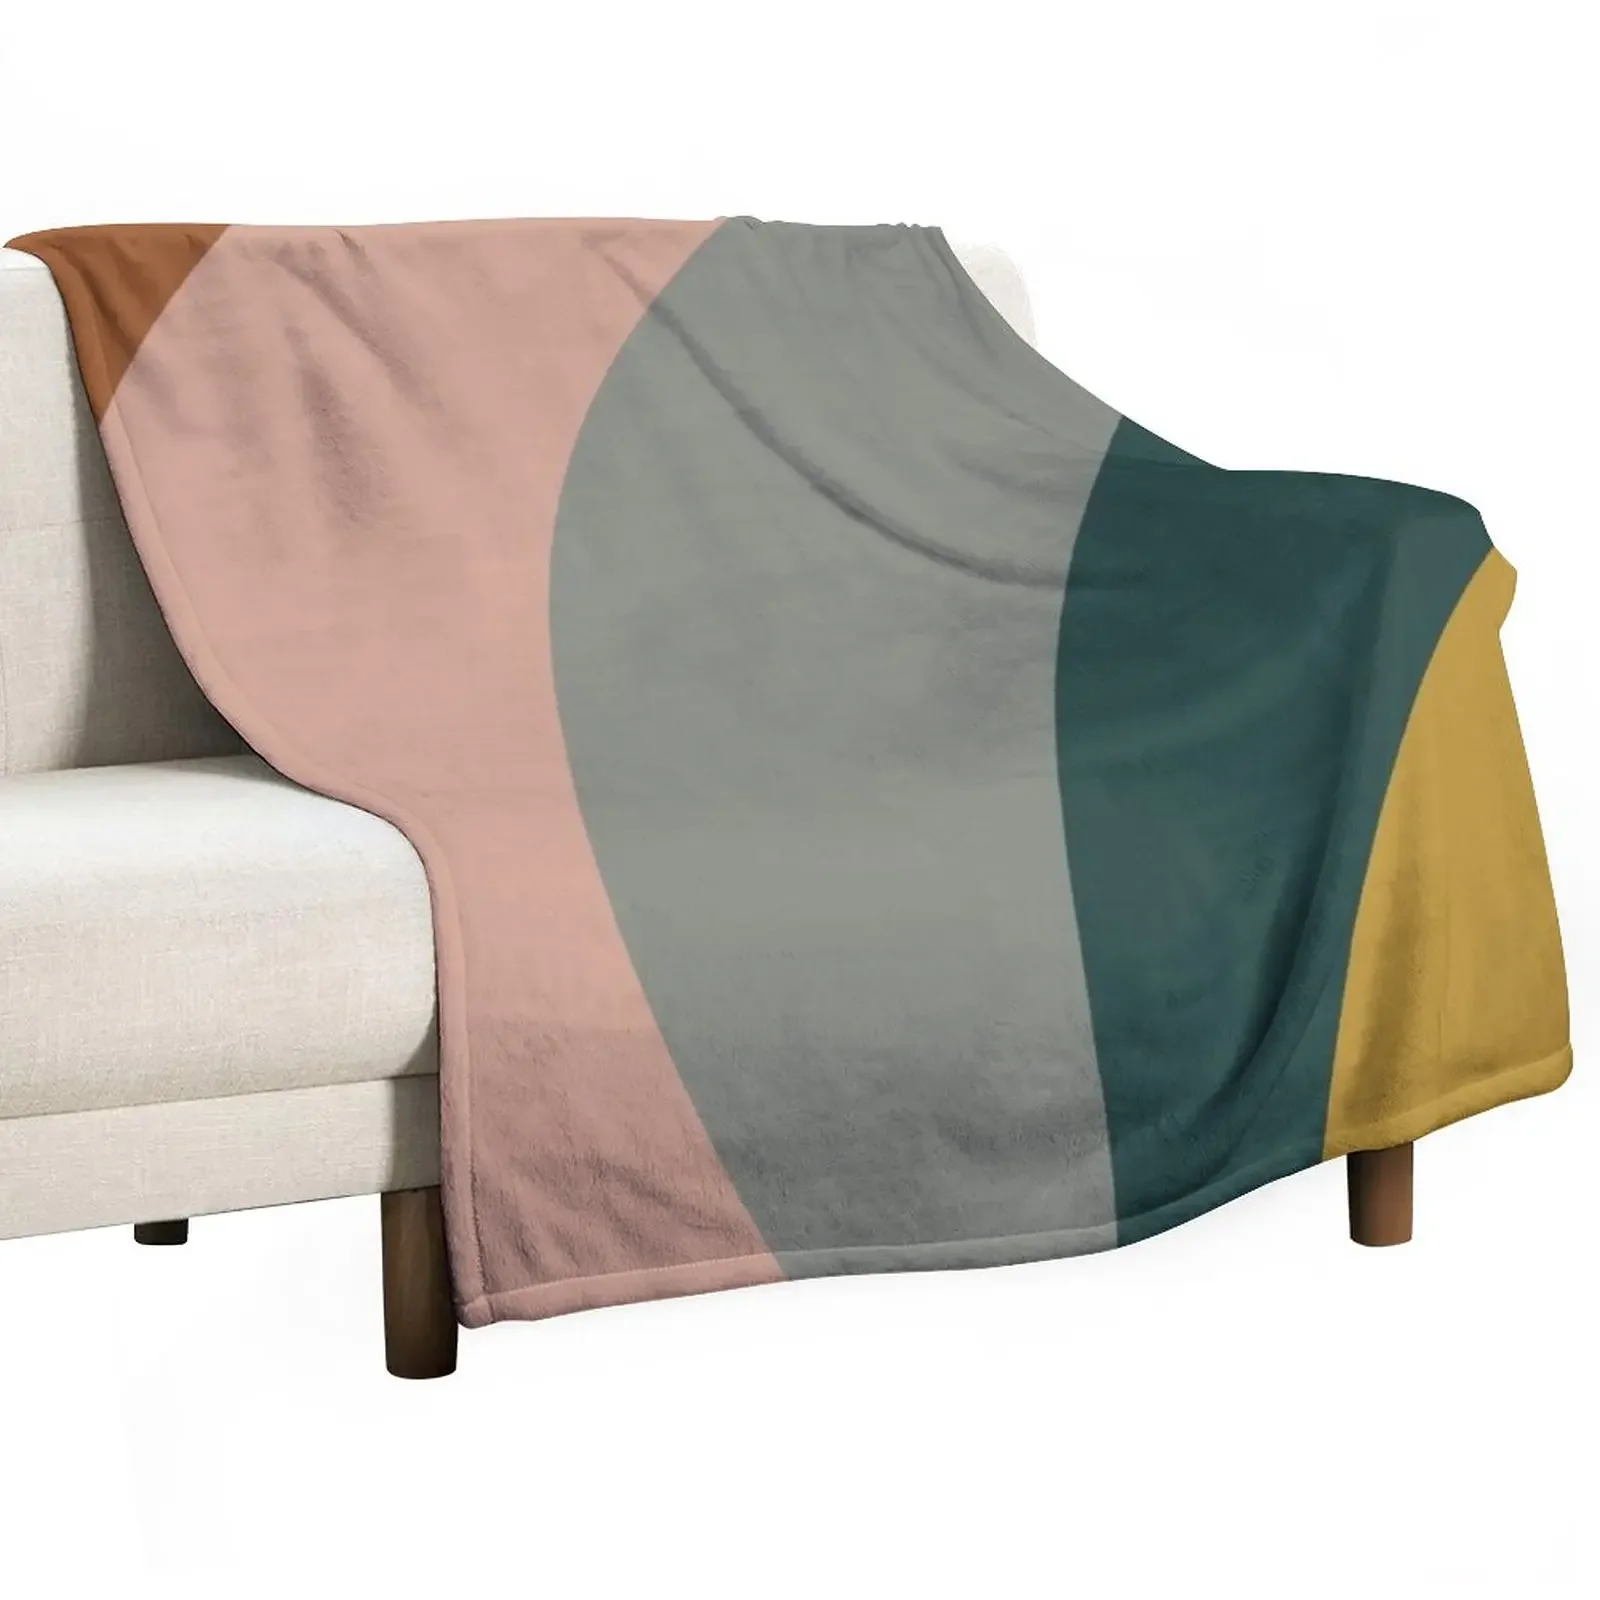 

Sound Waves Minimalist Pattern in Mustard Yellow, Teal, Grey, Blush Pink, and Rust Throw Blanket Quilt Sofa Blankets